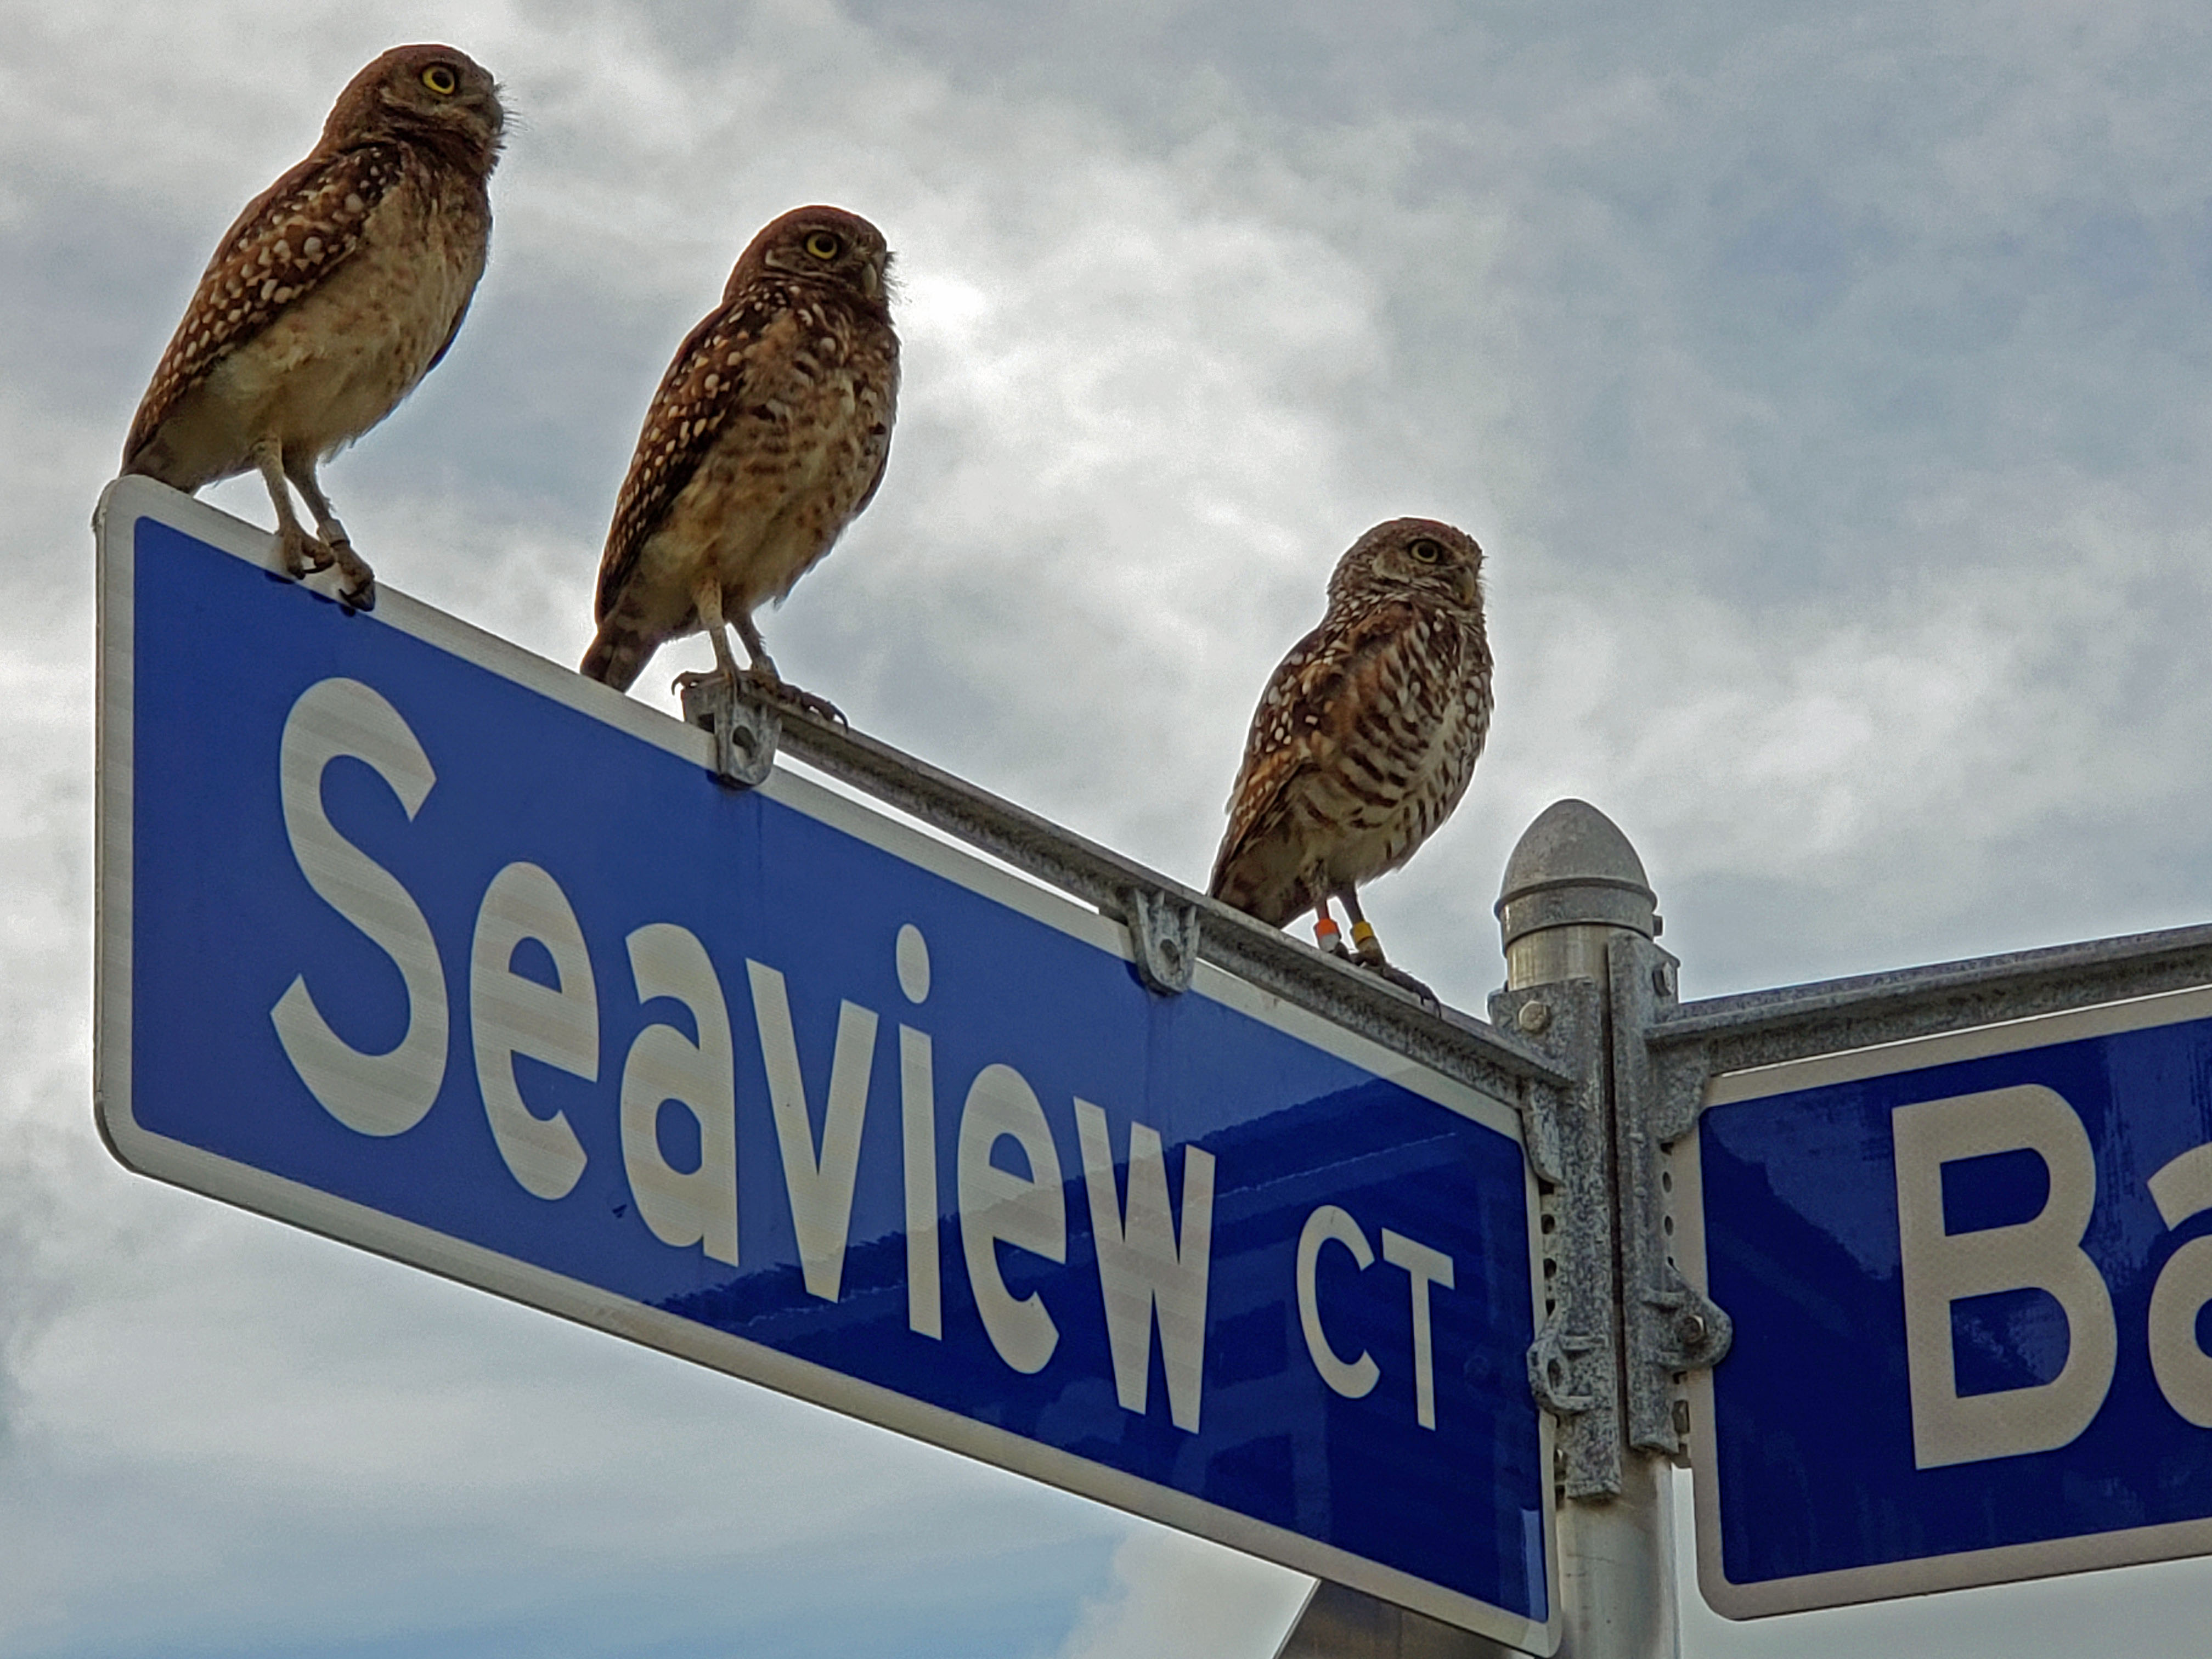 3 owls on street sign&conn=none